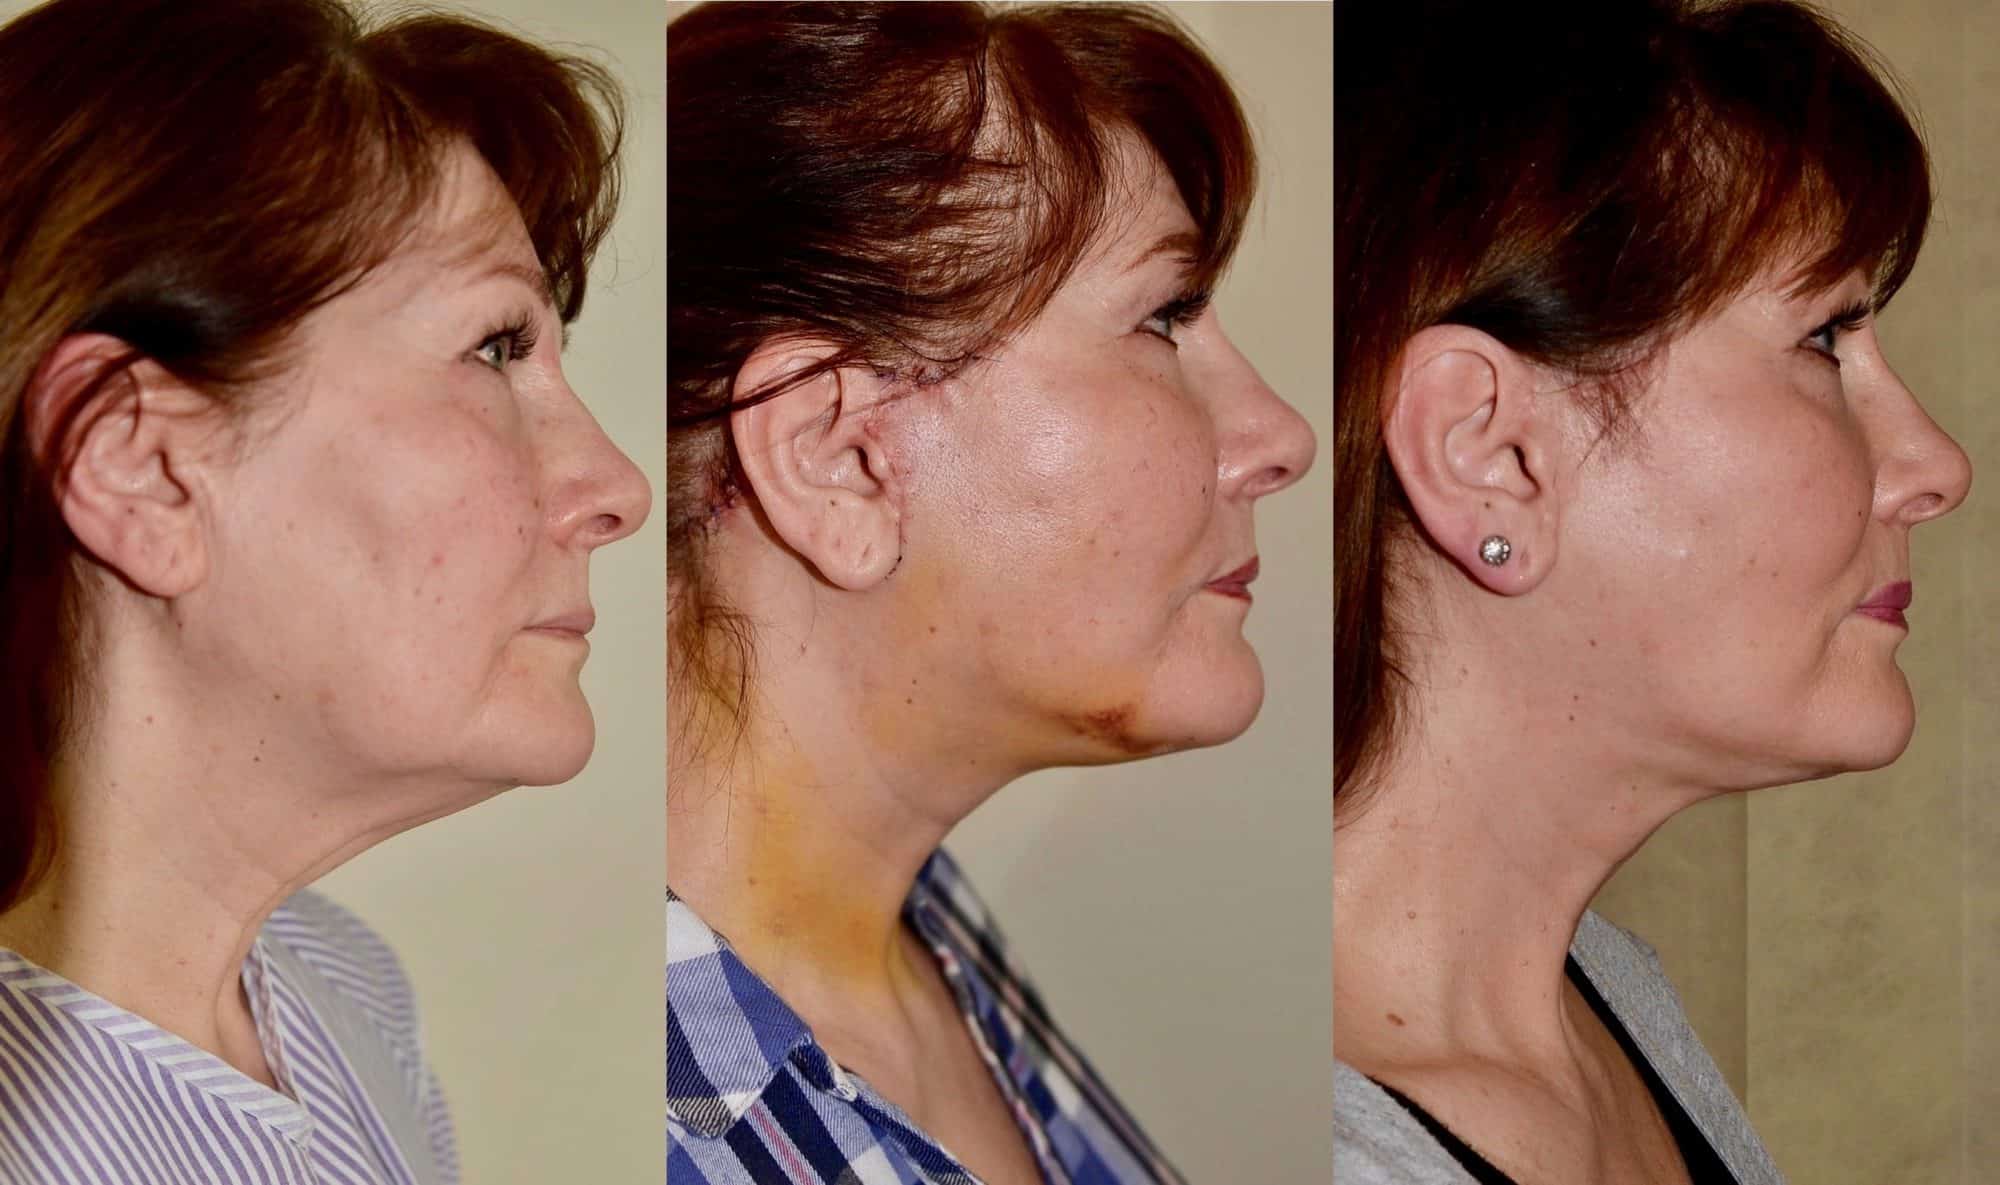 neck lift before and after